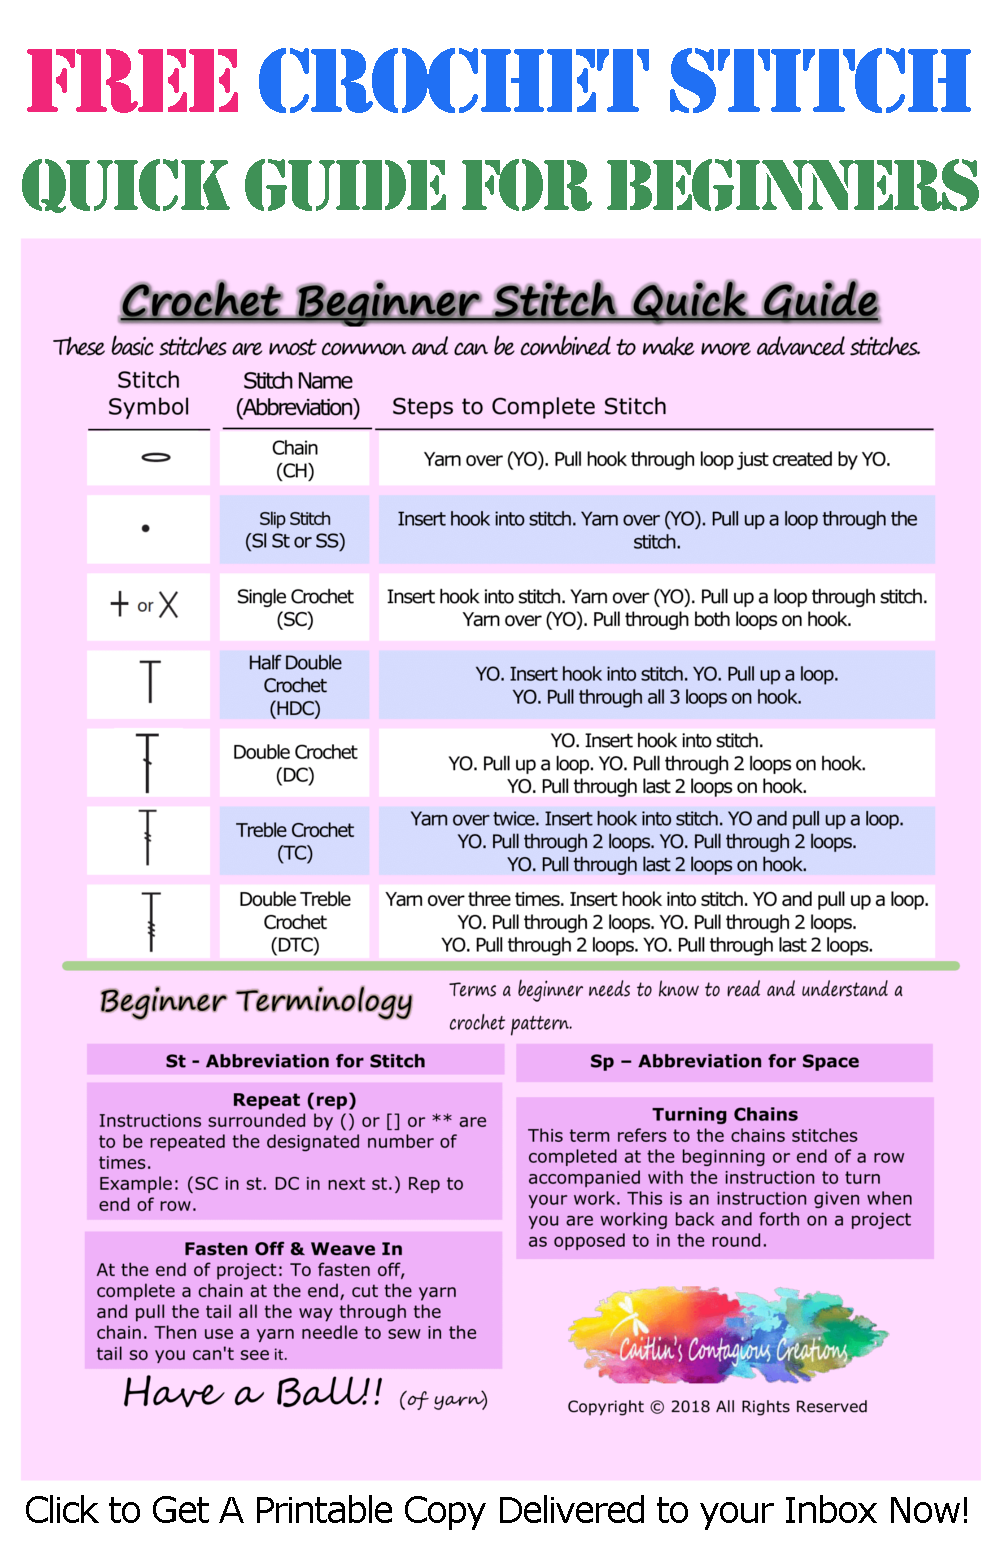 This beginner crochet stitch quick guide free printable pdf is available from Caitlin's Contagious Creations. Have this mini tutorial emailed to you today!